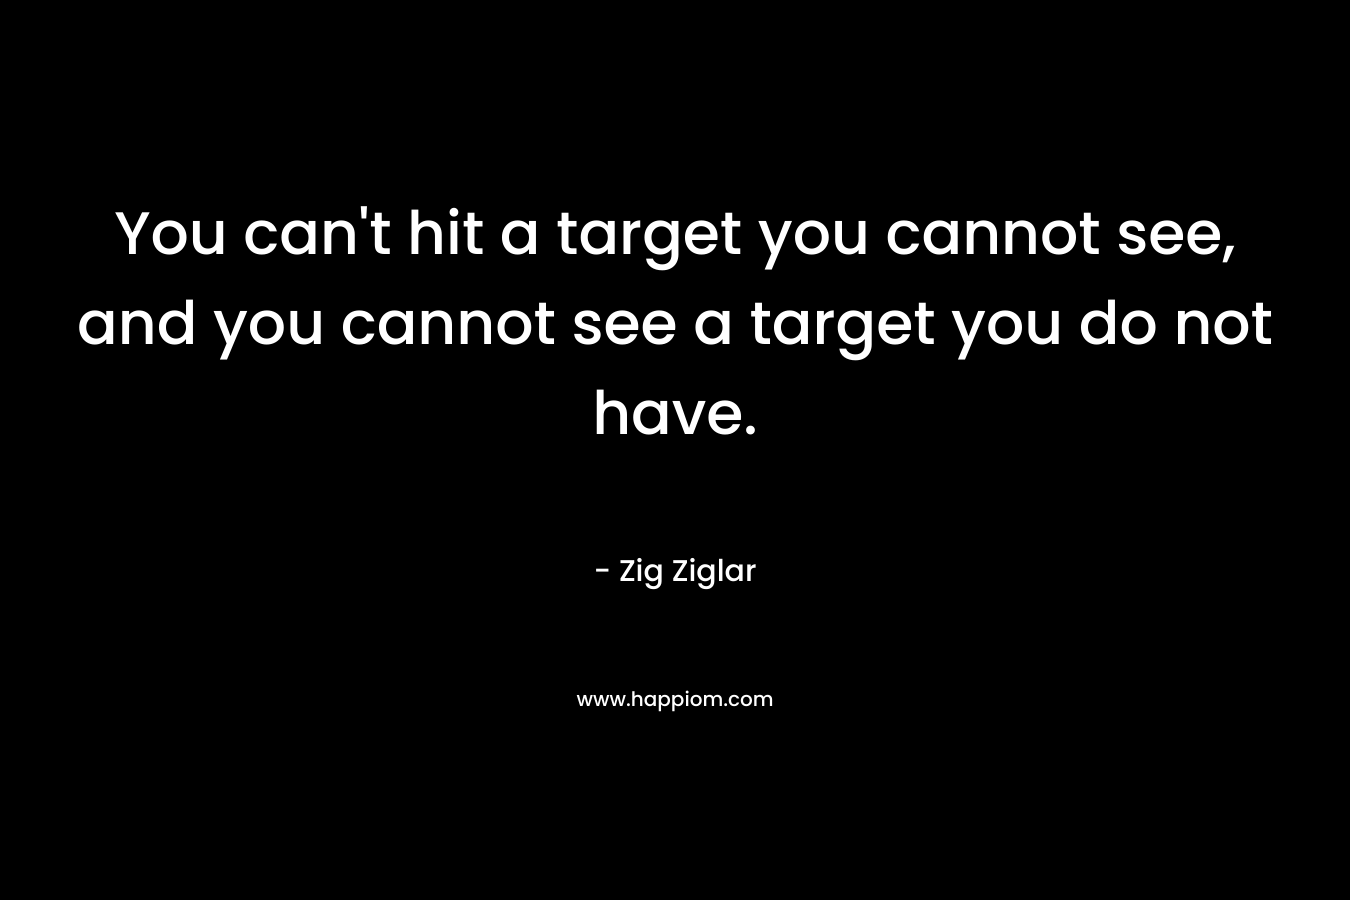 You can't hit a target you cannot see, and you cannot see a target you do not have.